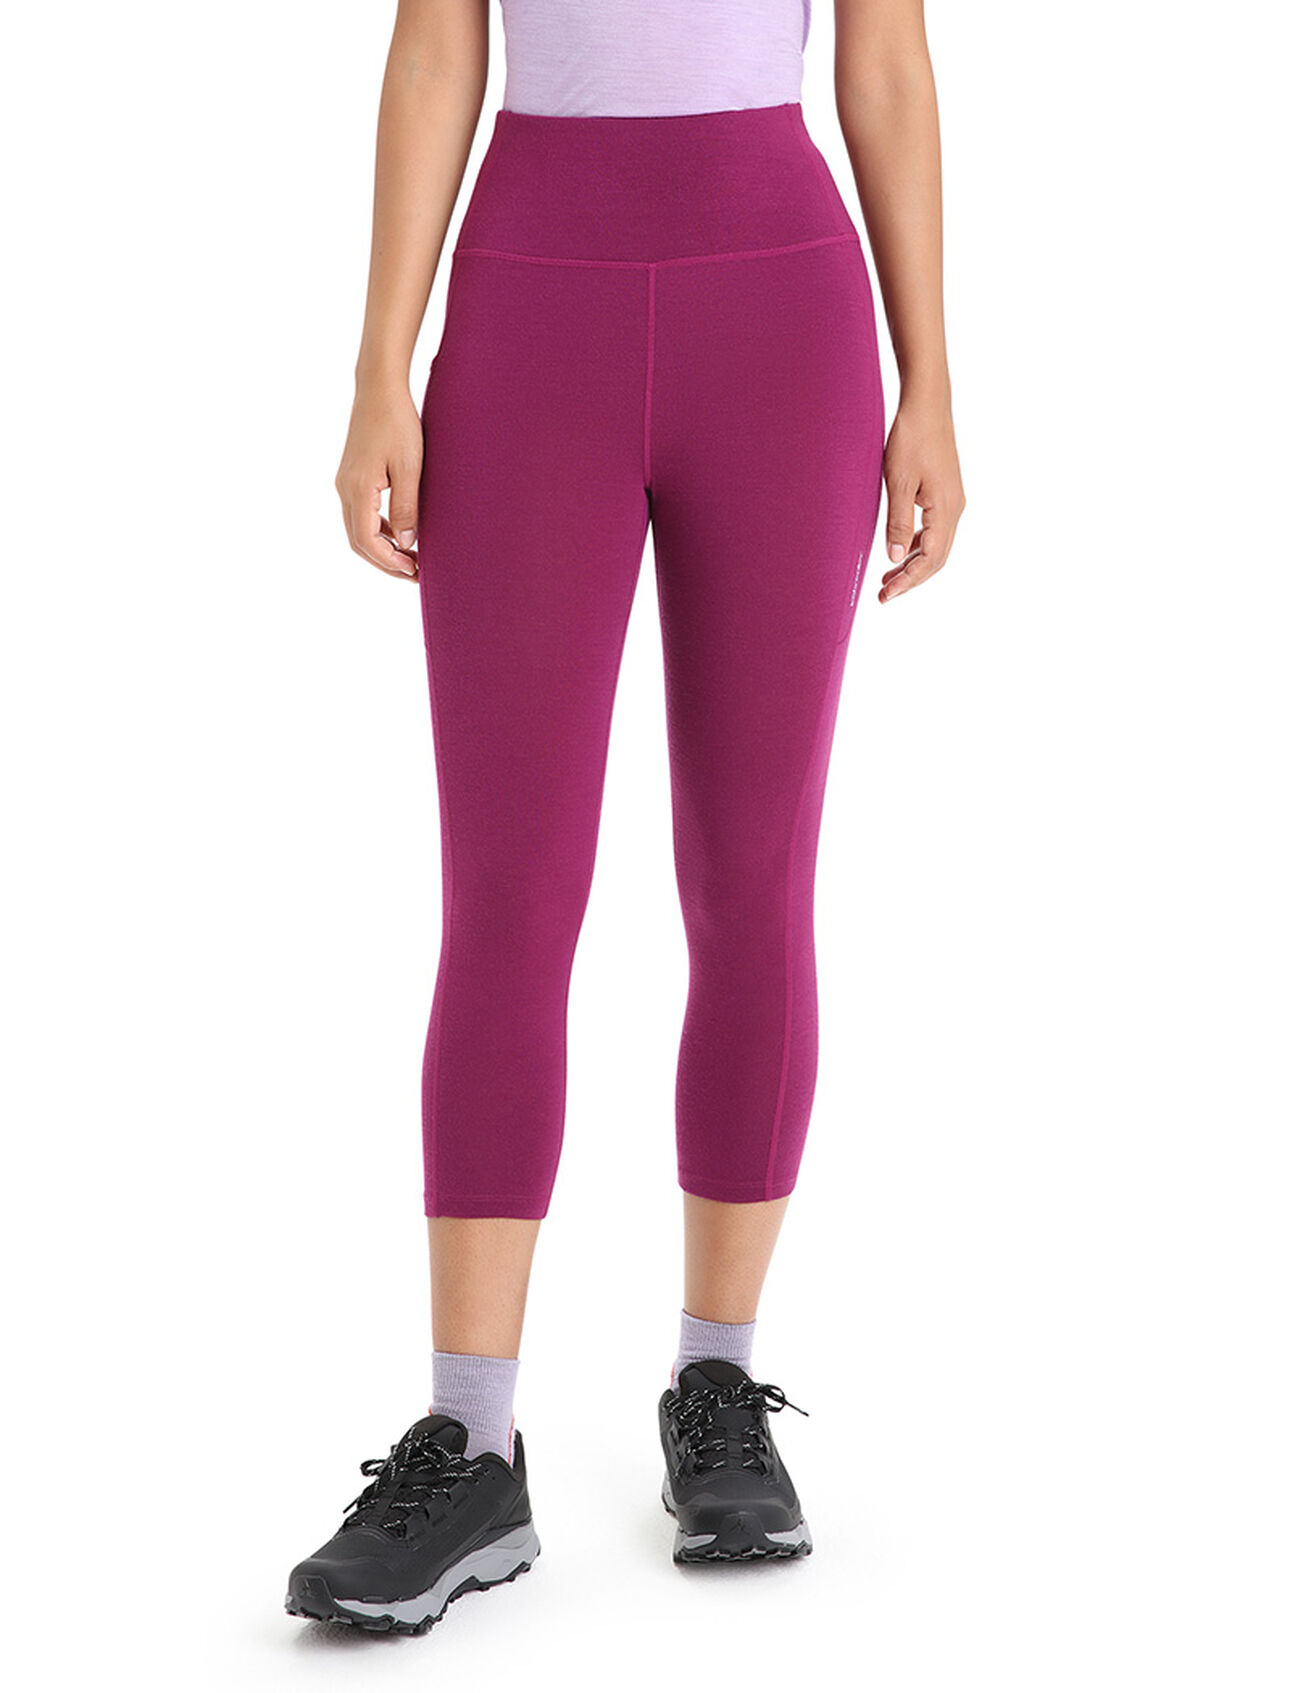 Womens Merino Fastray High Rise 3/4 Tights Functional, form-fitting bottoms for active performance on or off the trail, the Fastray High Rise 3/4 Tights feature a stretchy merino wool blend with a high waist for added coverage.